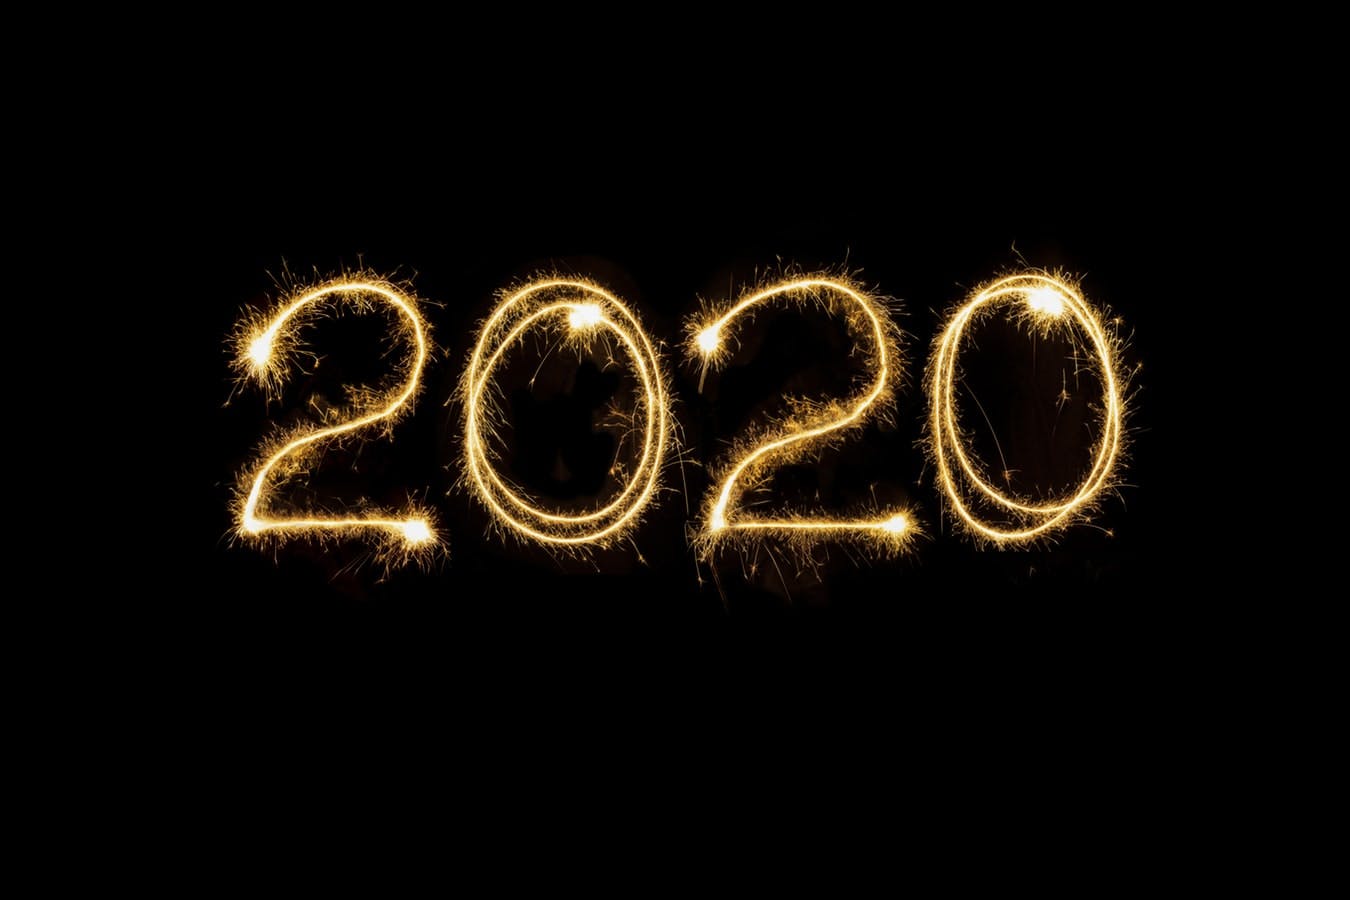 from the roaring '20s to 2020